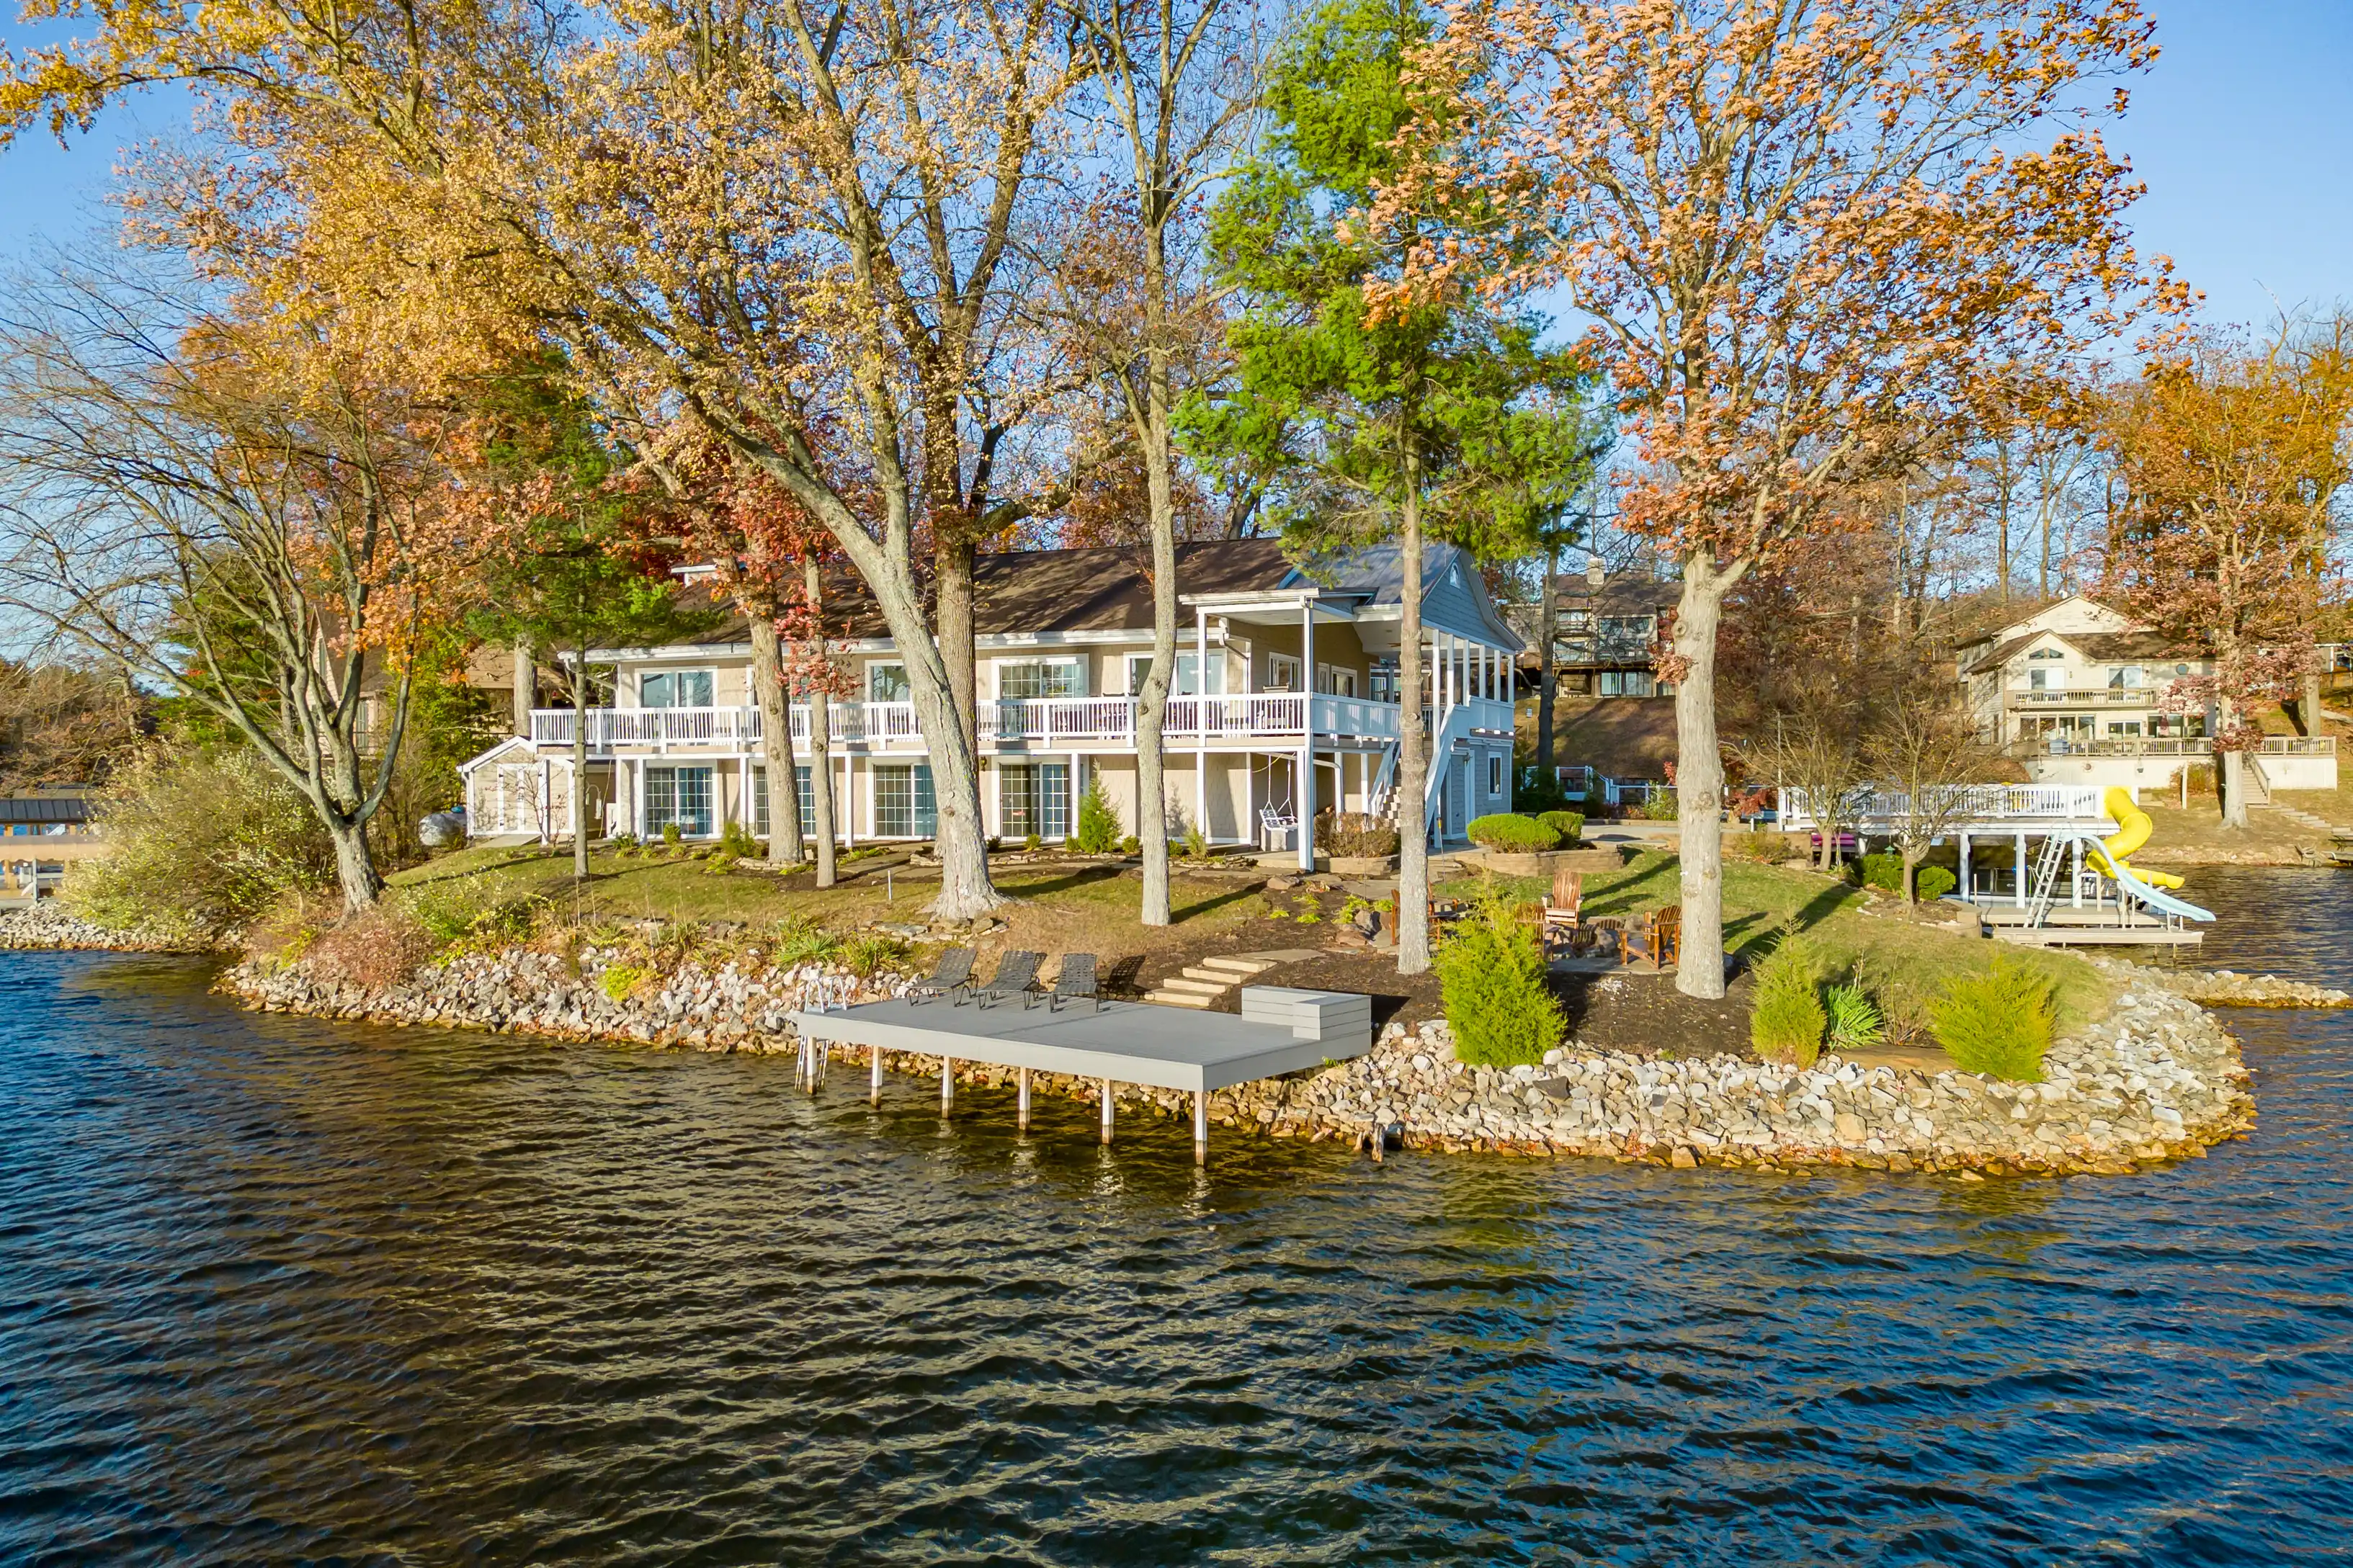 Lakefront homes with porches and autumn trees, featuring a small pier and a yellow slide into the water.